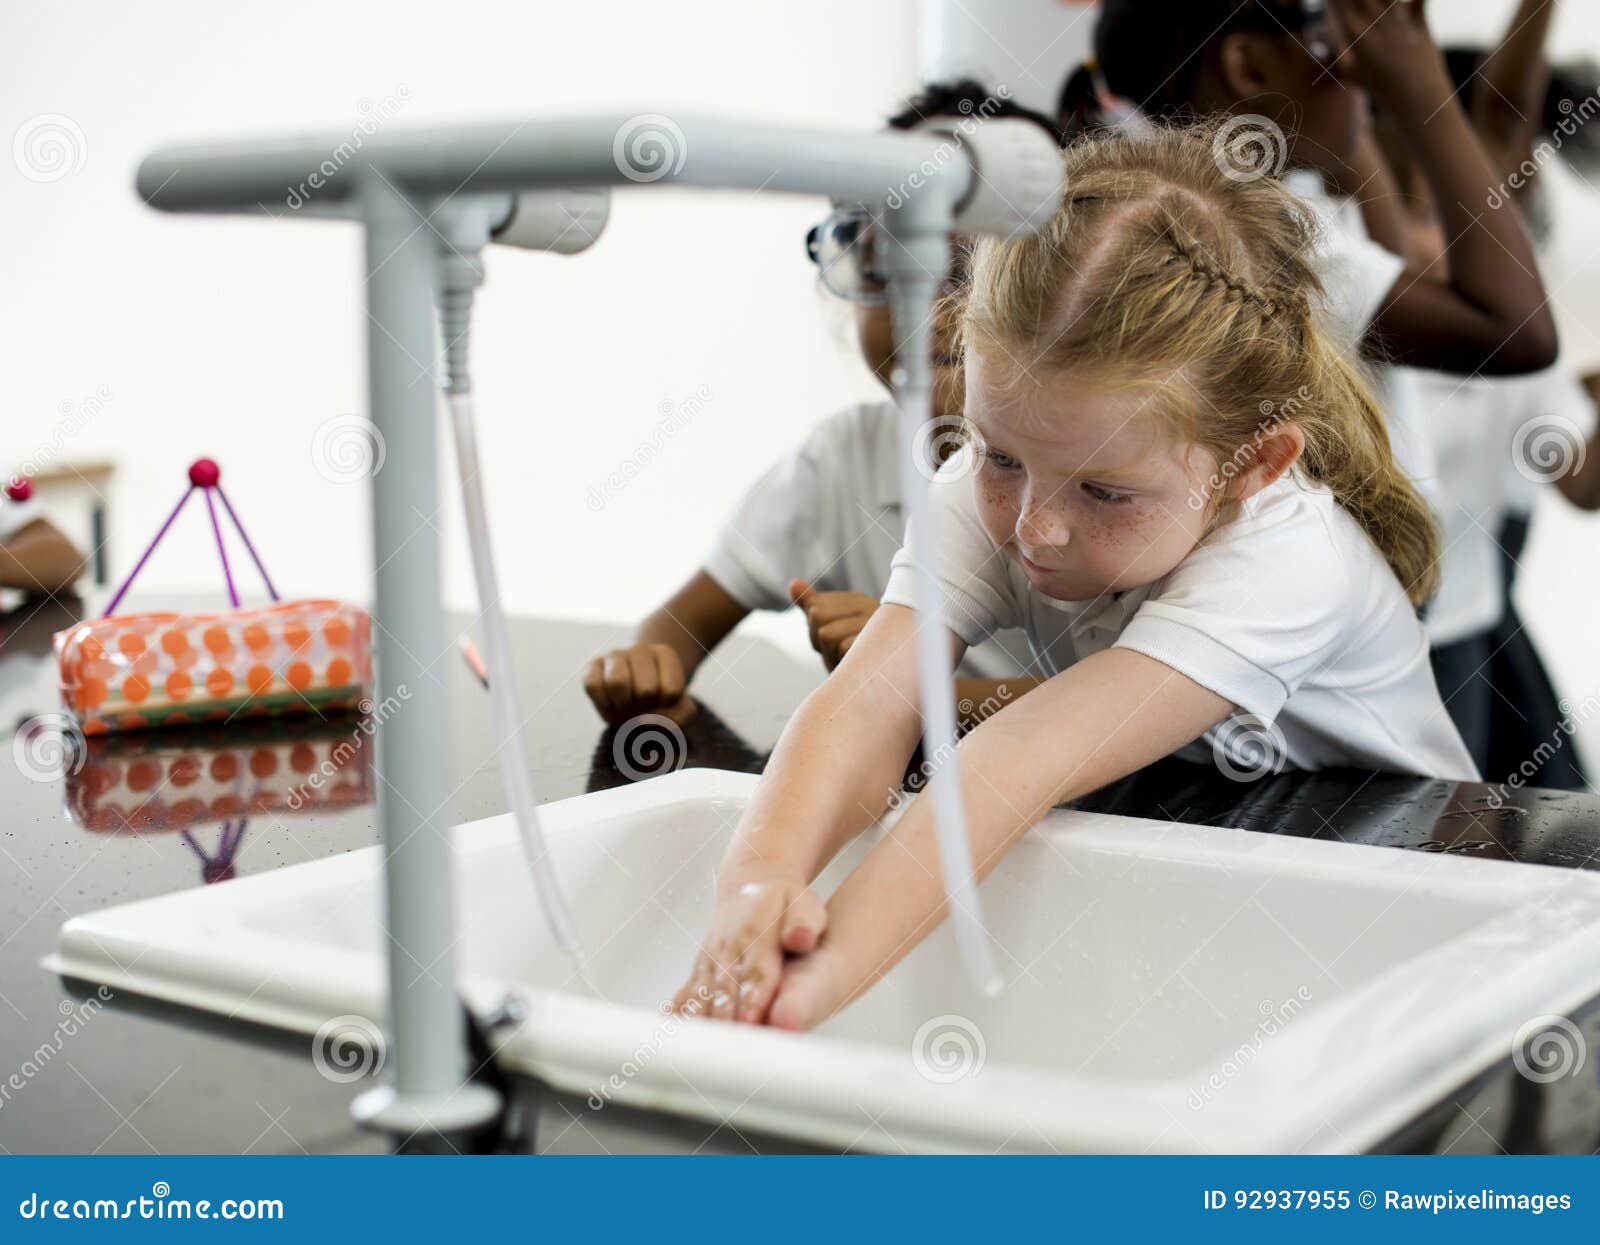 Young Girl Washing Hands With Water Stock Image Image Of Pipe